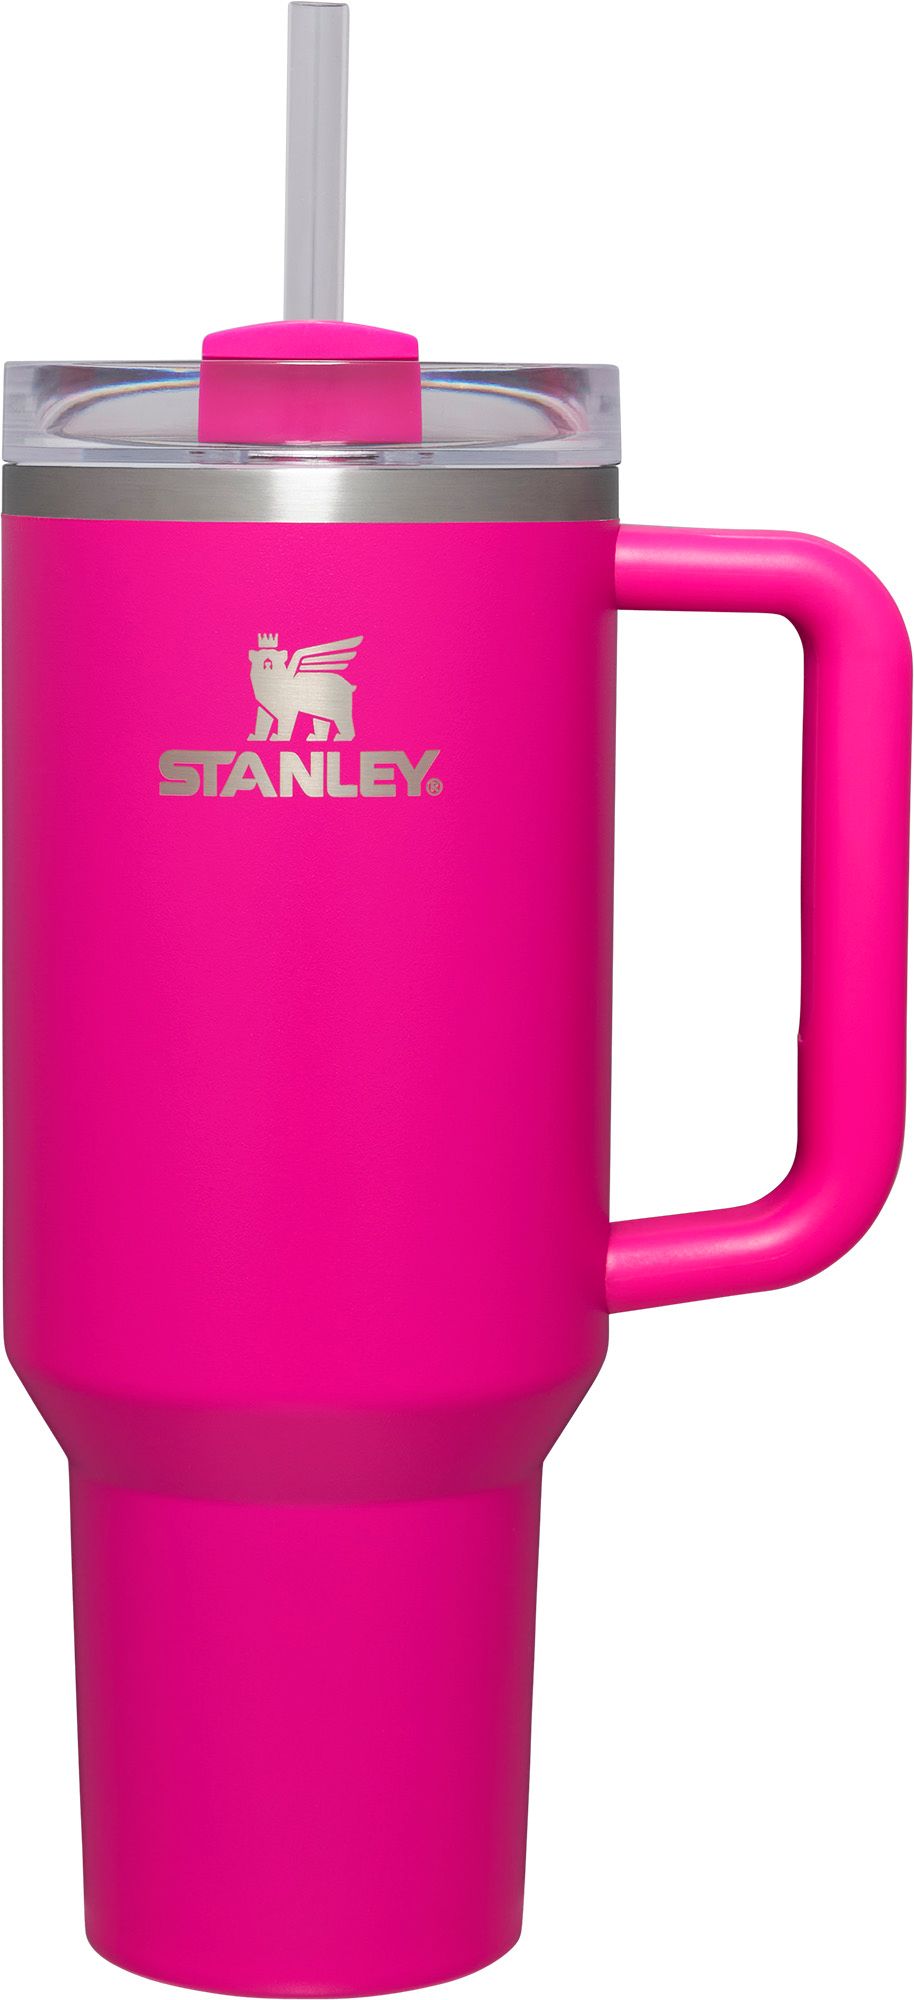 Stanley Pitcher Set $31 Shipped